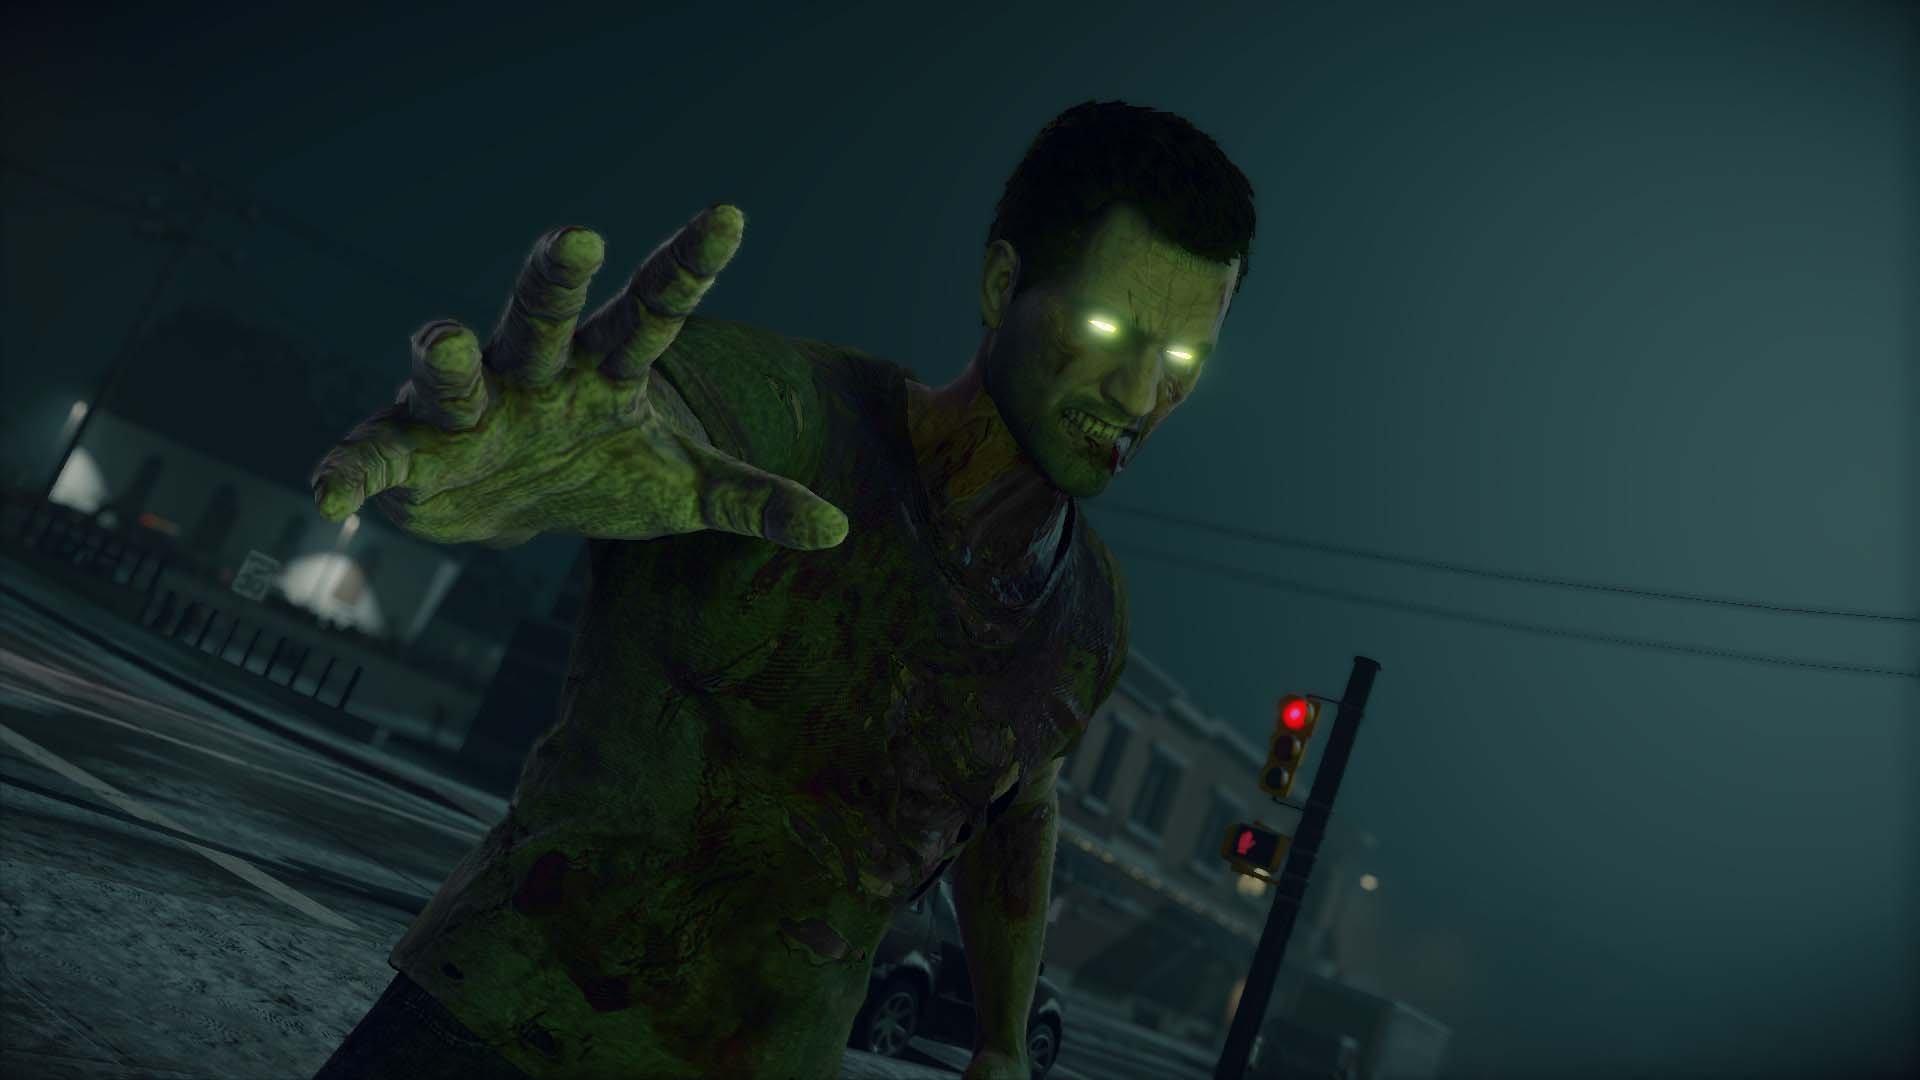 Ps4 PlayStation 4 Game Dead Rising for Sale in Homestead, FL